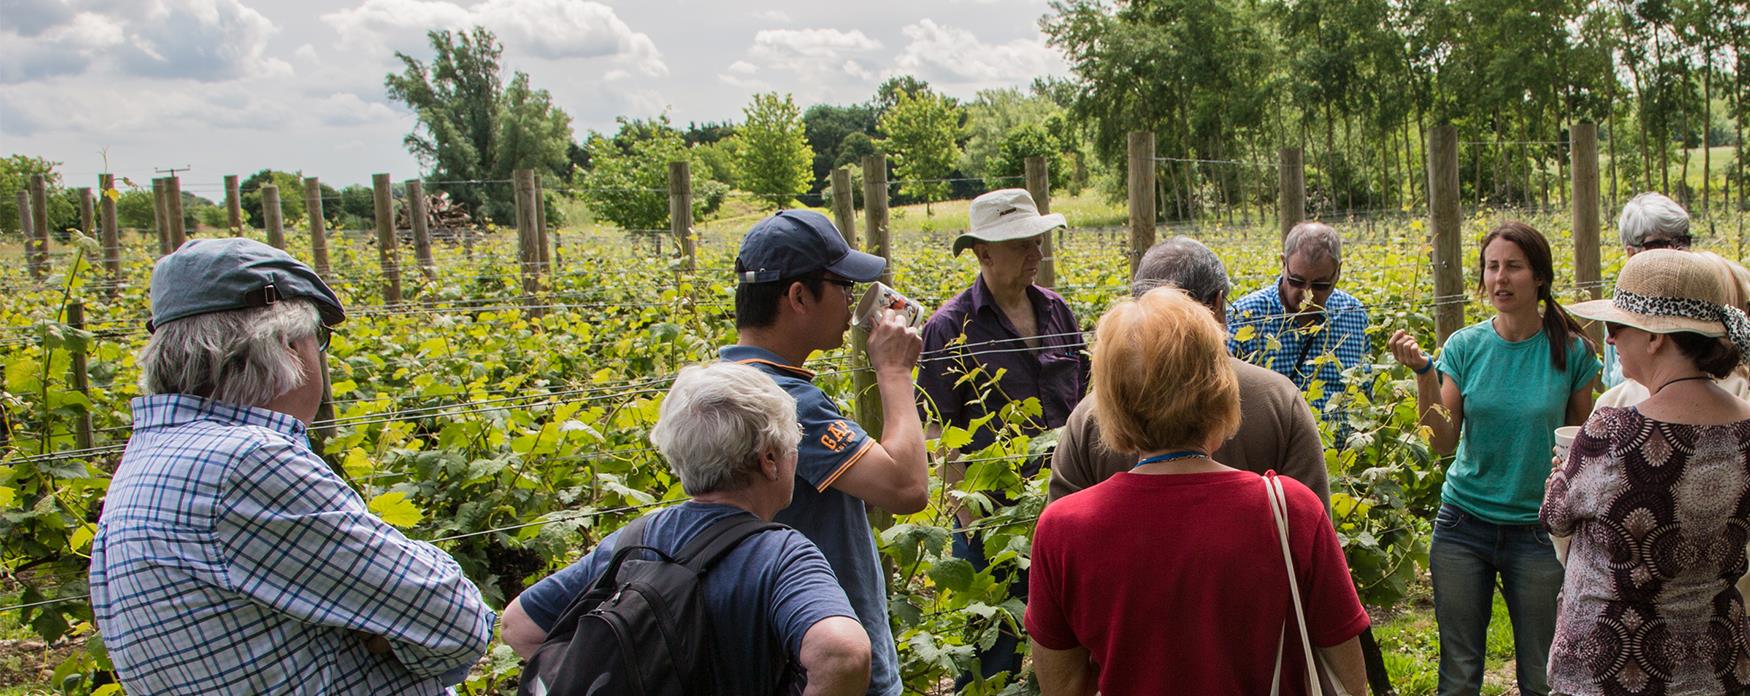 A group standing among vines at Bardfield Vineyard